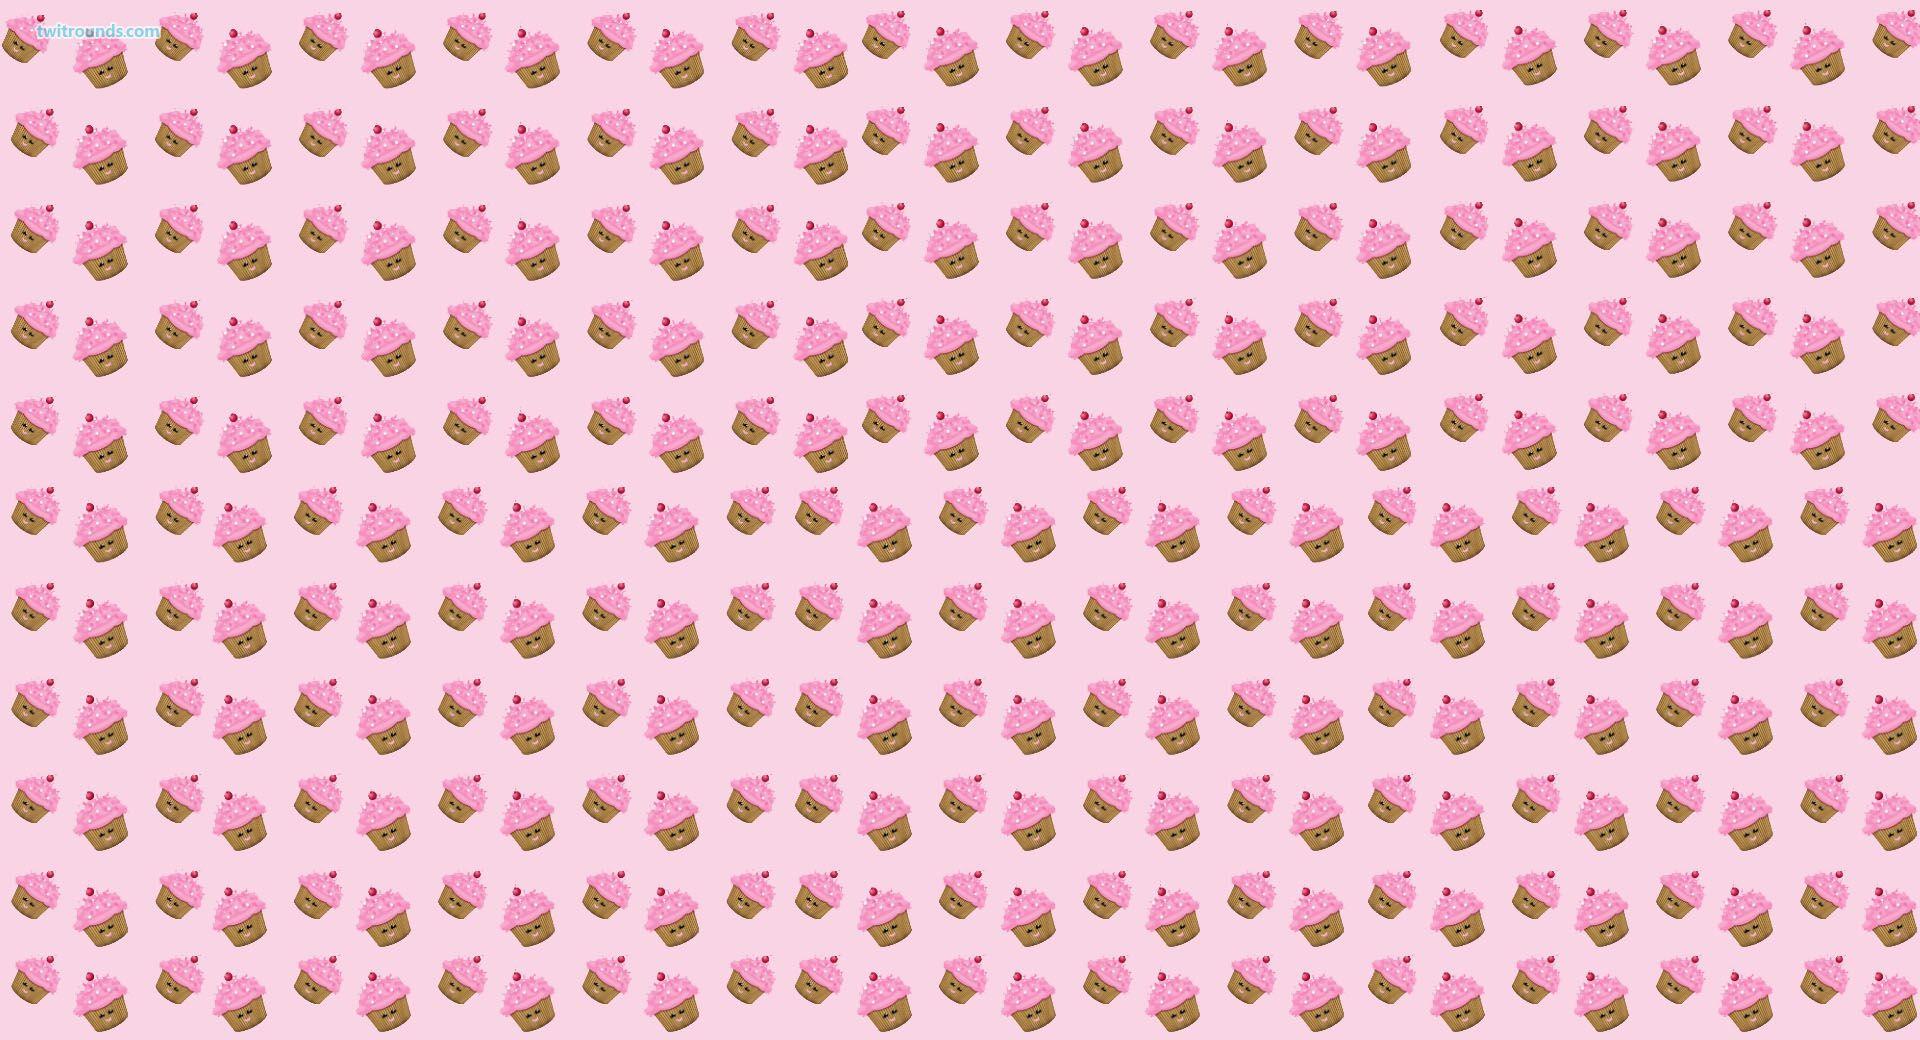 Cupcake Wallpaper 11 Wallpaper Background HD With Resolutions 1920